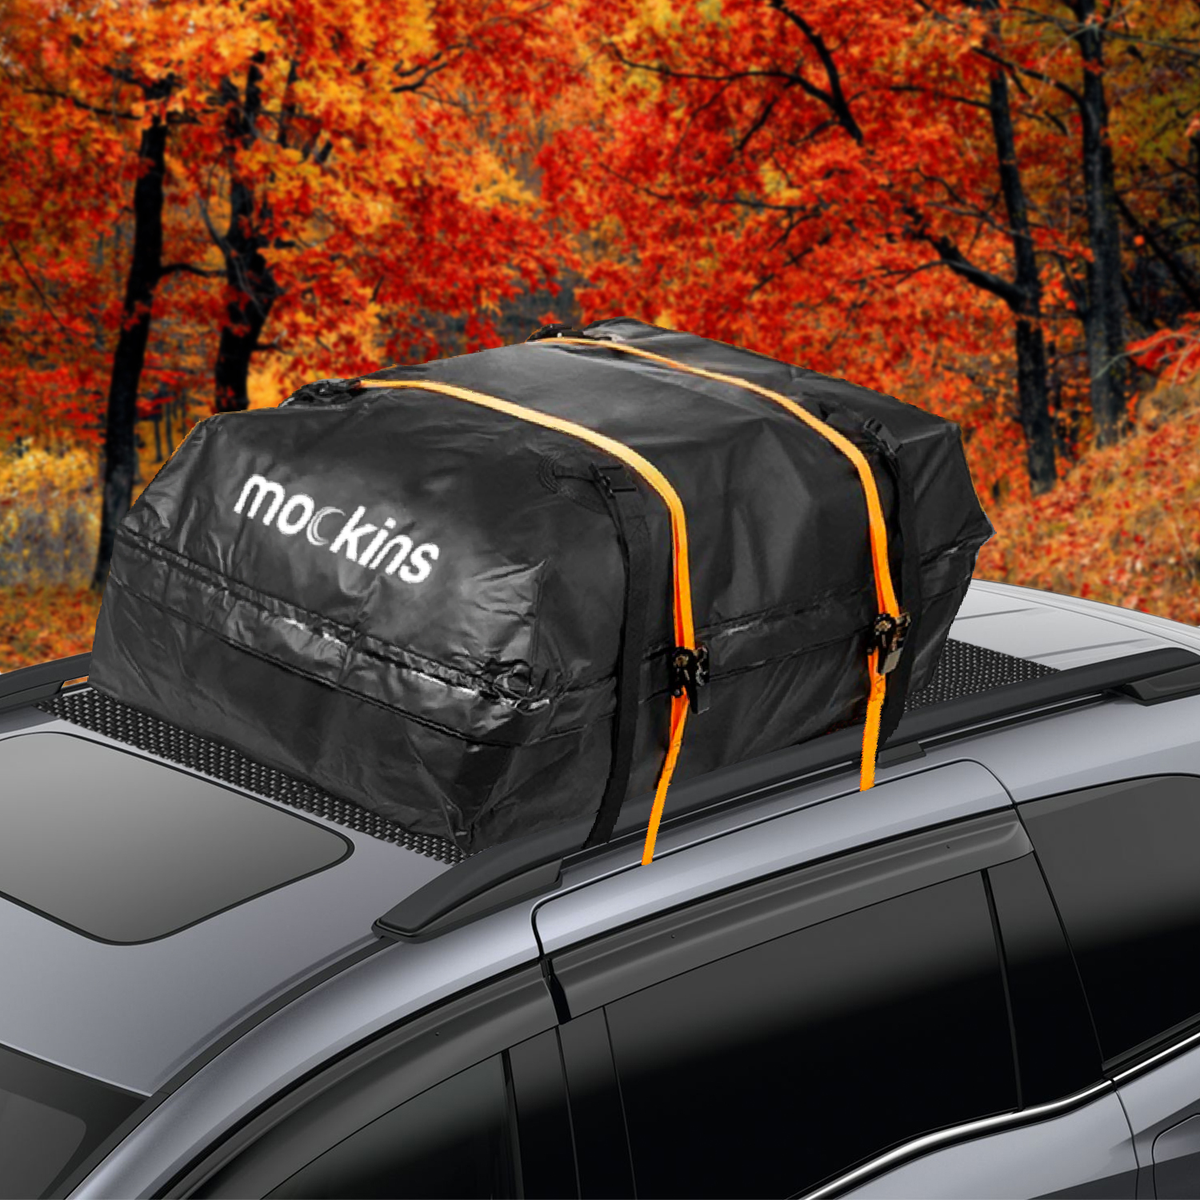 Mockins Car Roof Mat With Roof Bag And Ratchet Straps On Top Of Car